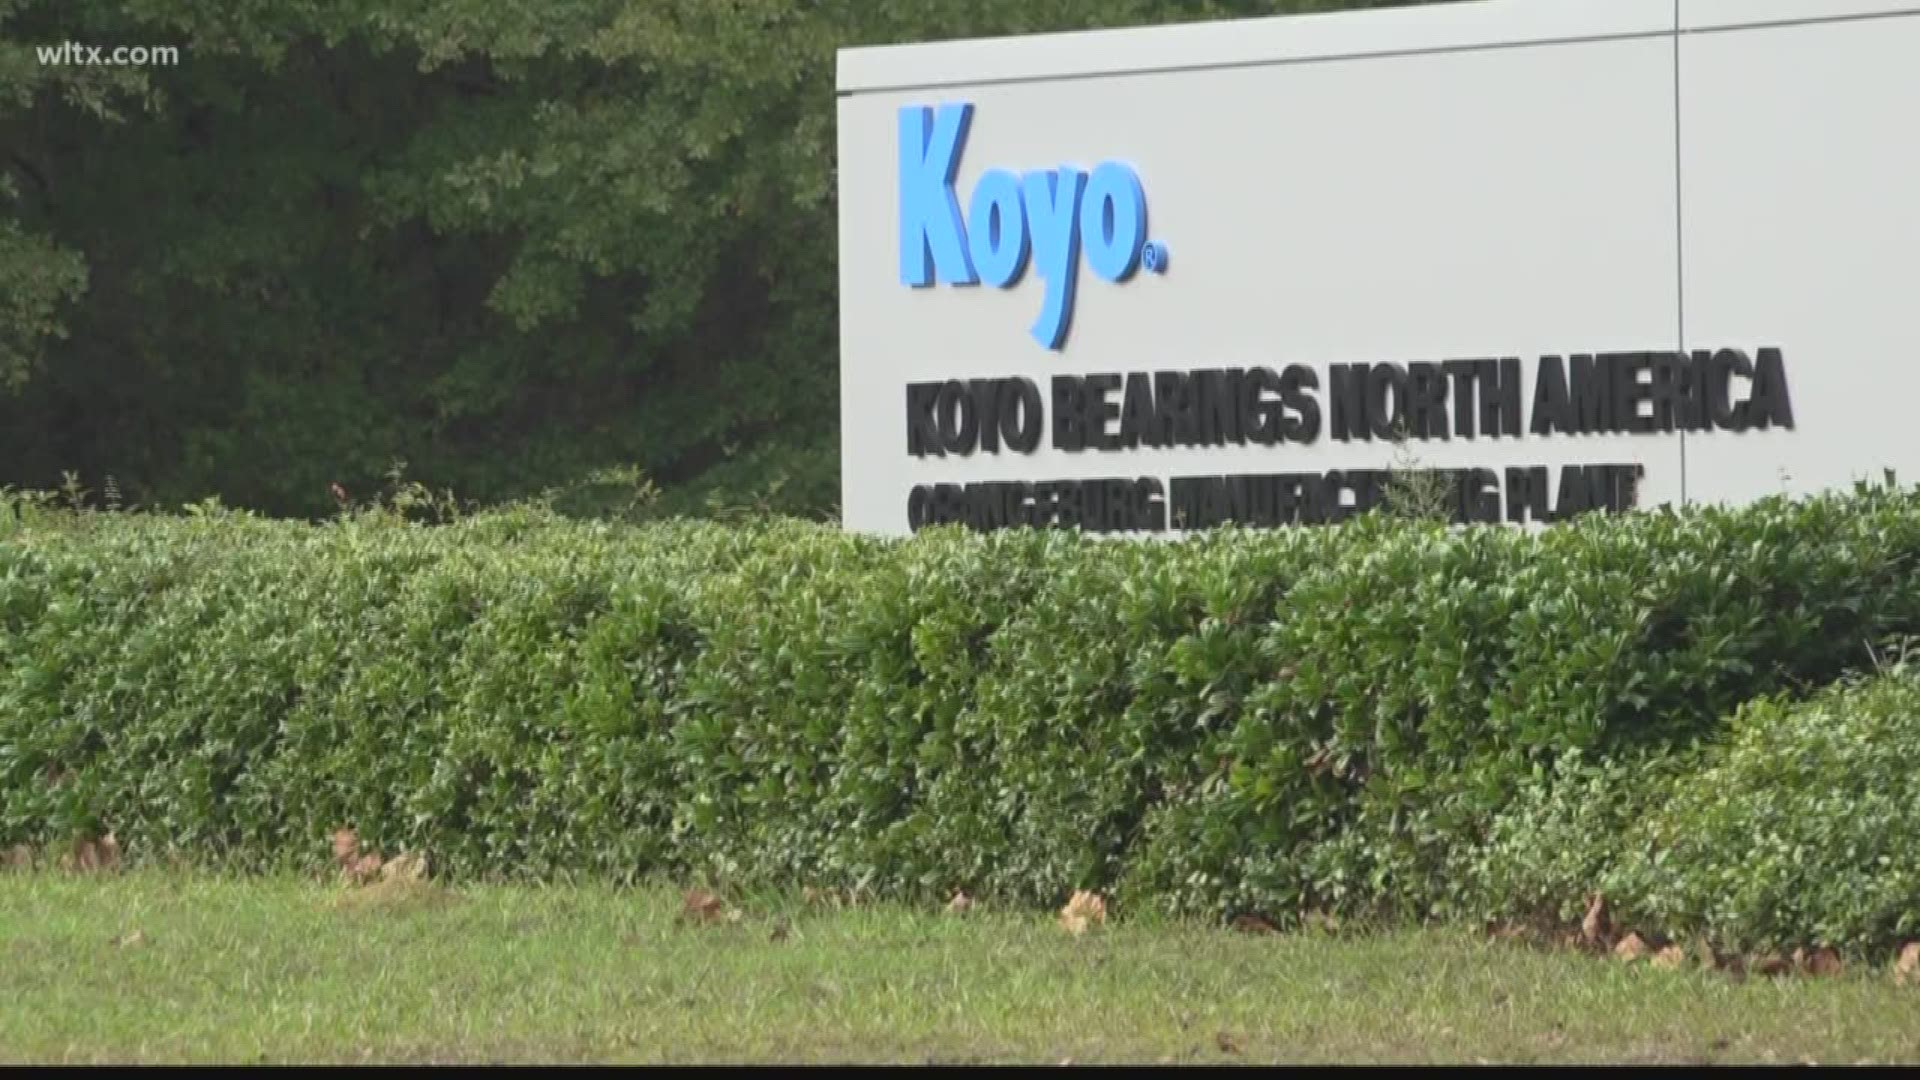 Koyo plant in Orangeburg will end their operations in March 2021,  361 jobs lost.